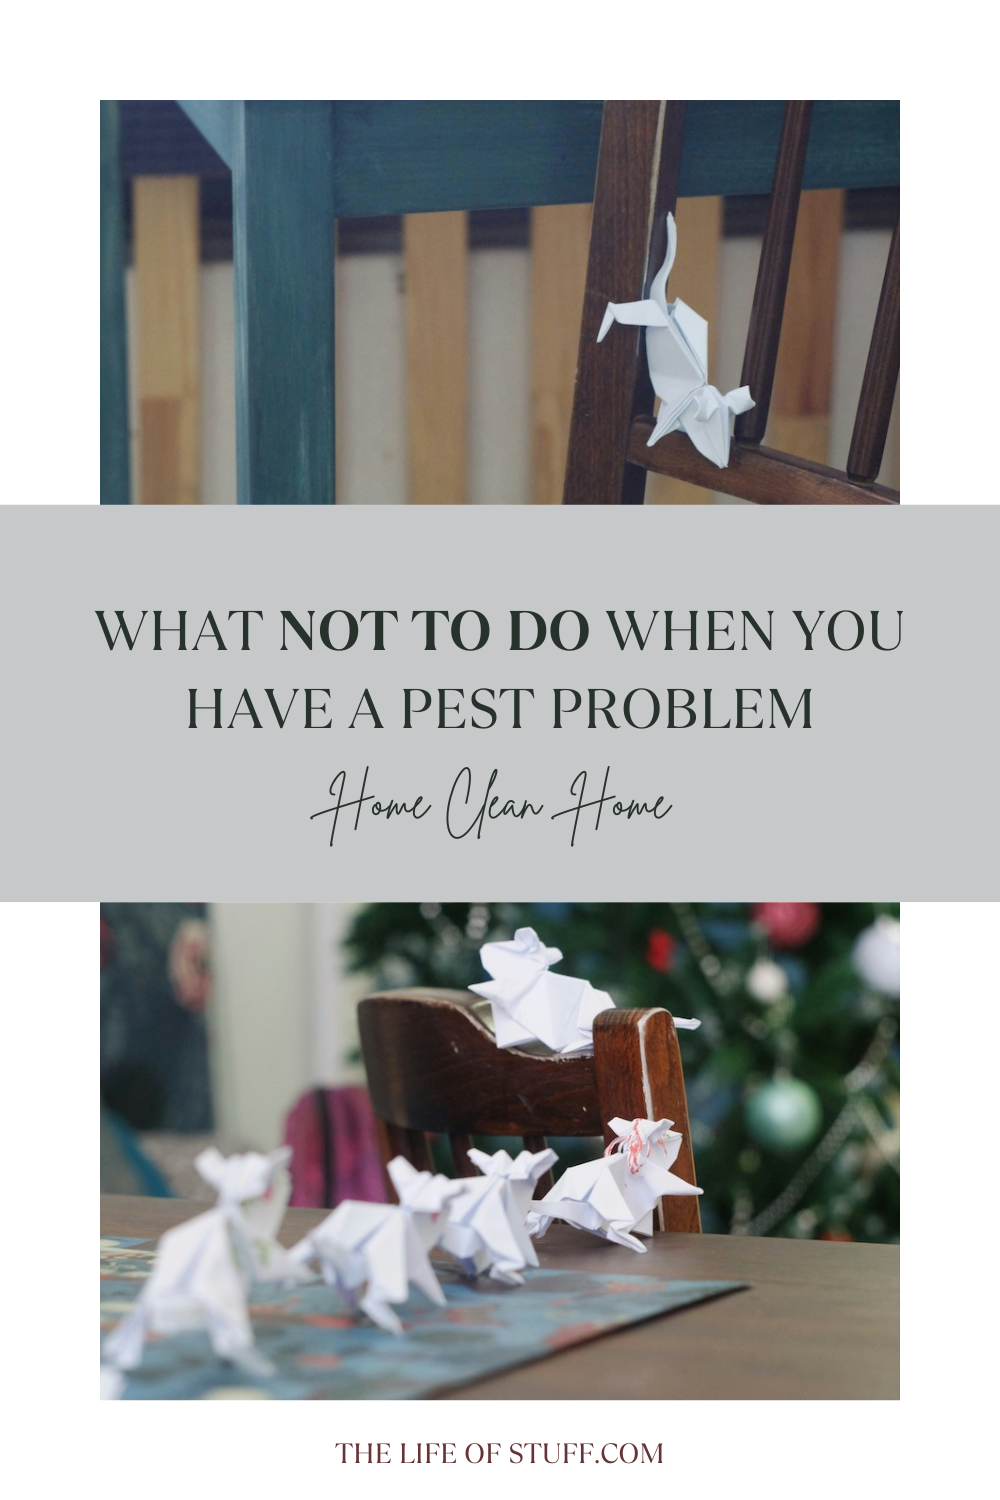 At Home - What NOT To Do When You Have A Pest Problem - The Life of Stuff